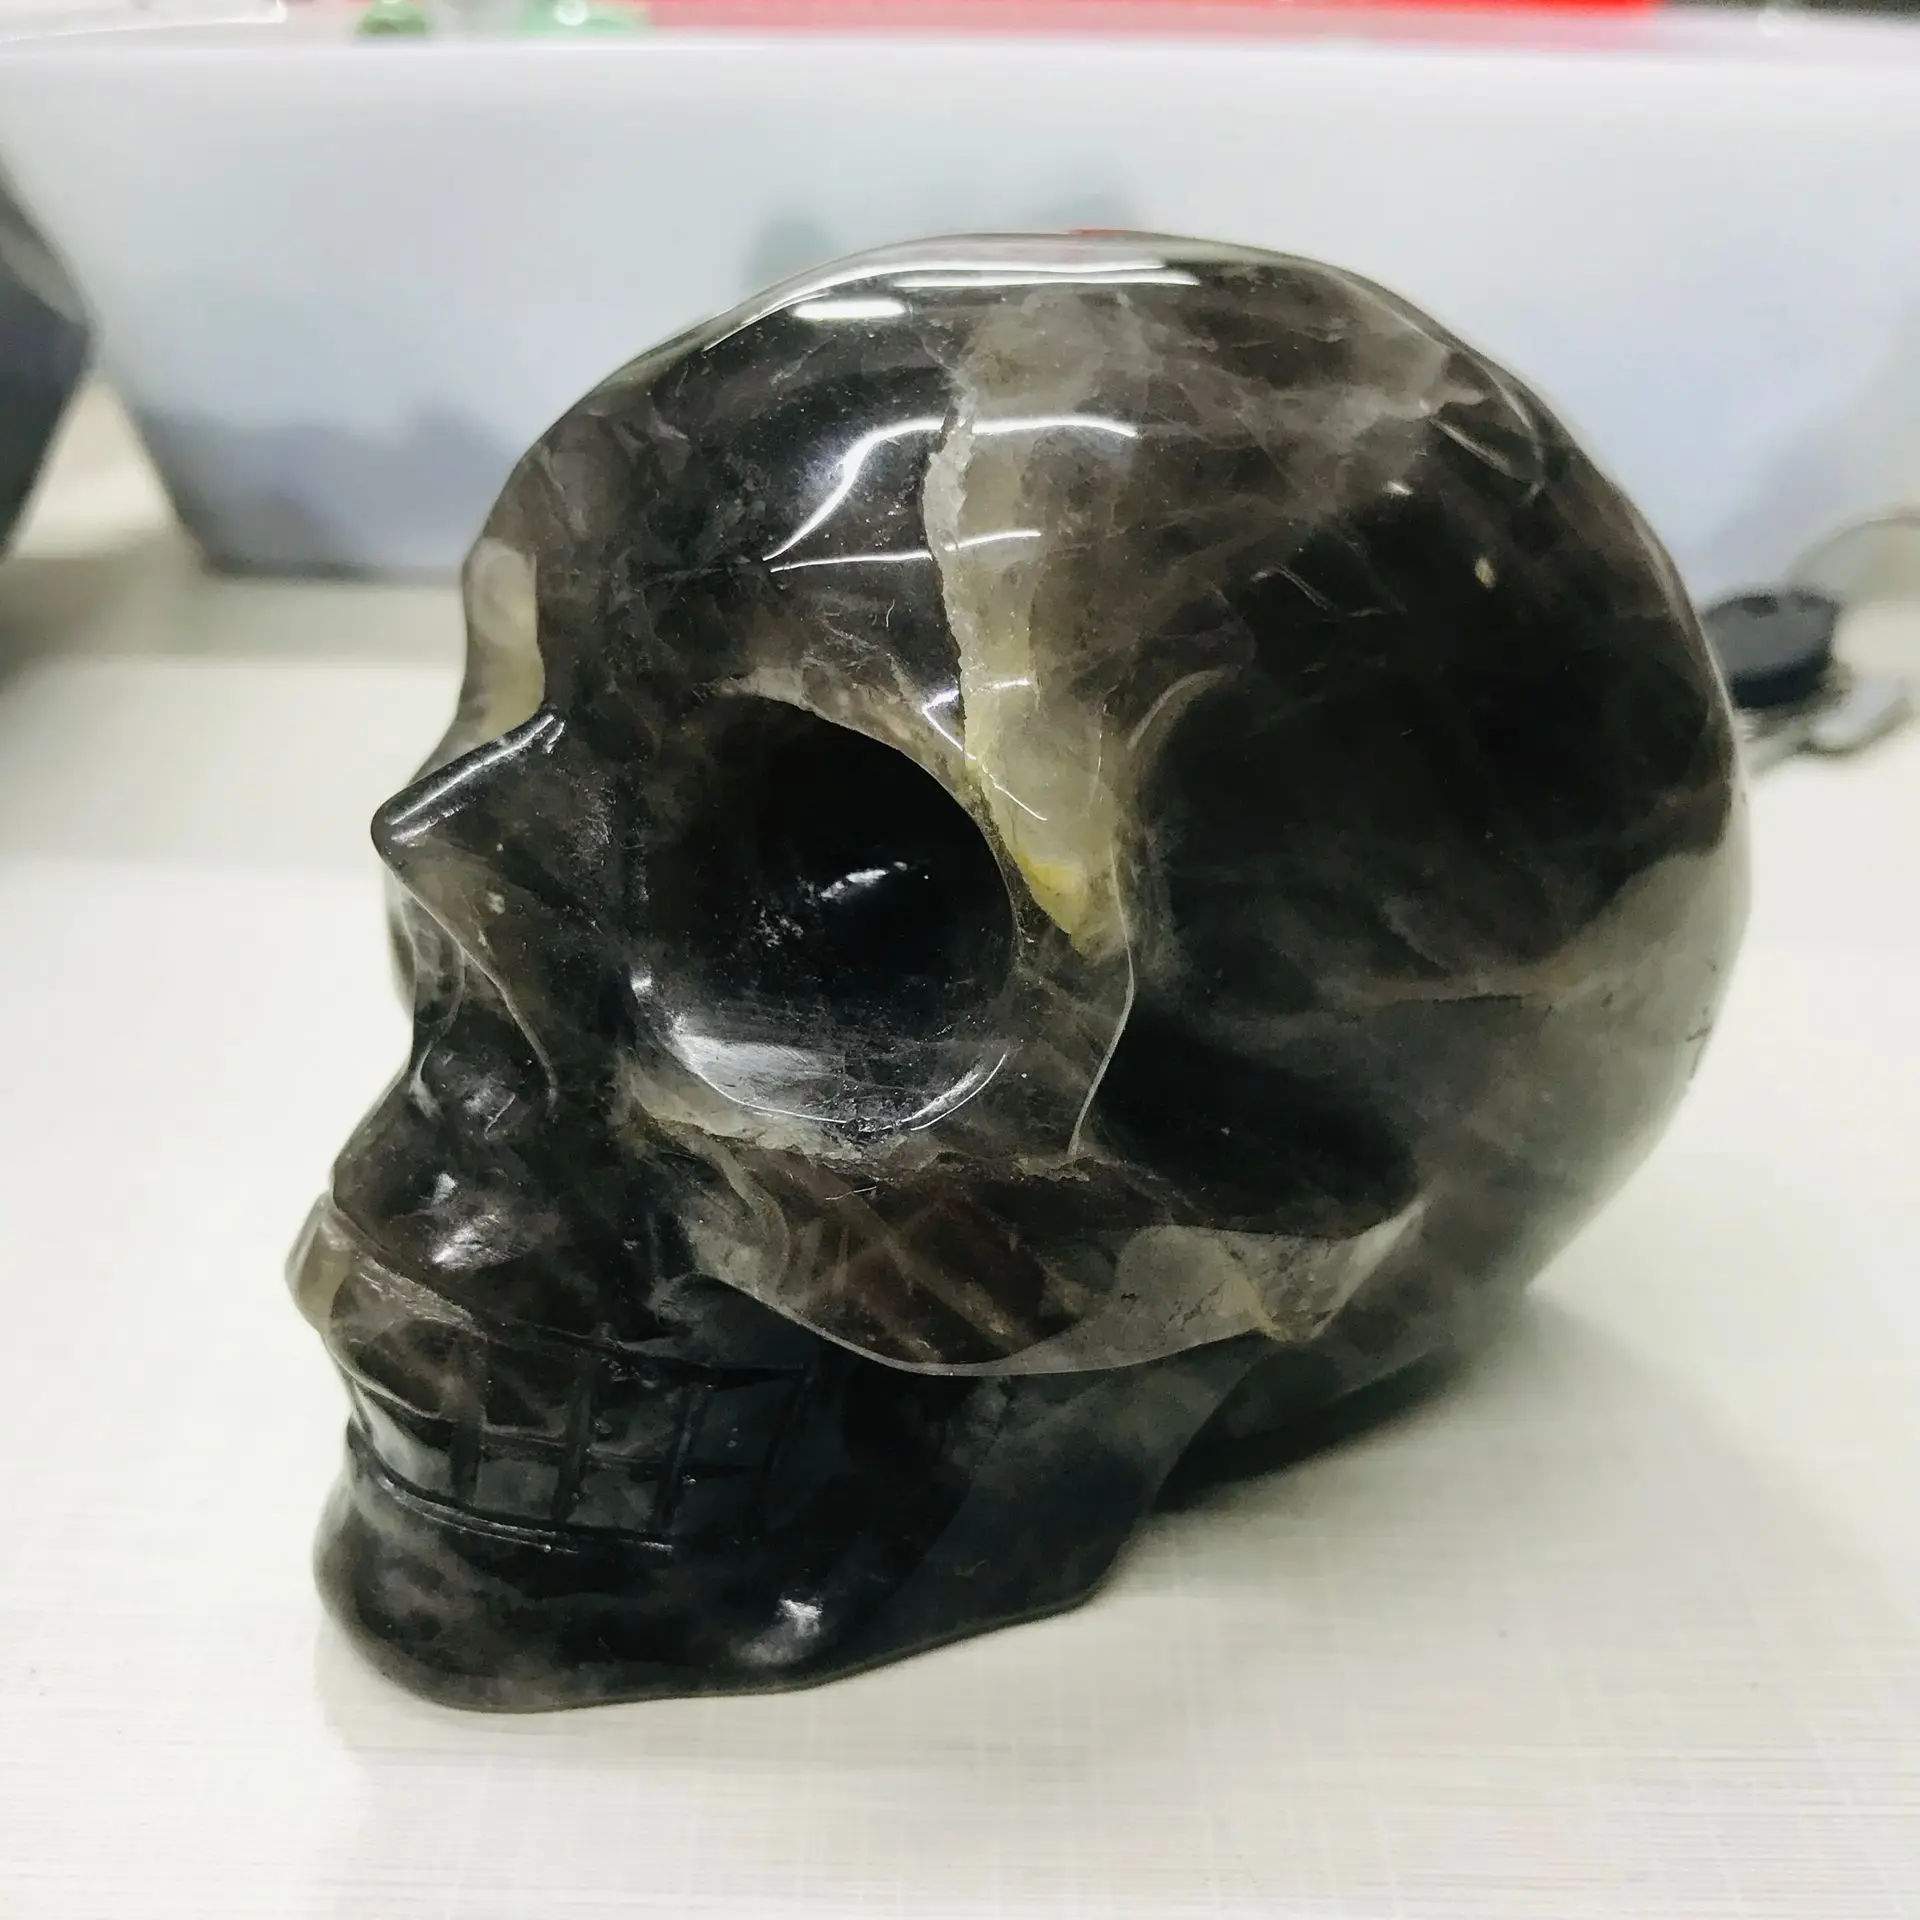 TEA CRYSTAL HEAD SKULL , REALLY THE BIGGER THE MORE BEAUTIFUL, WITH A POWERFUL LOVE HEALING STONE